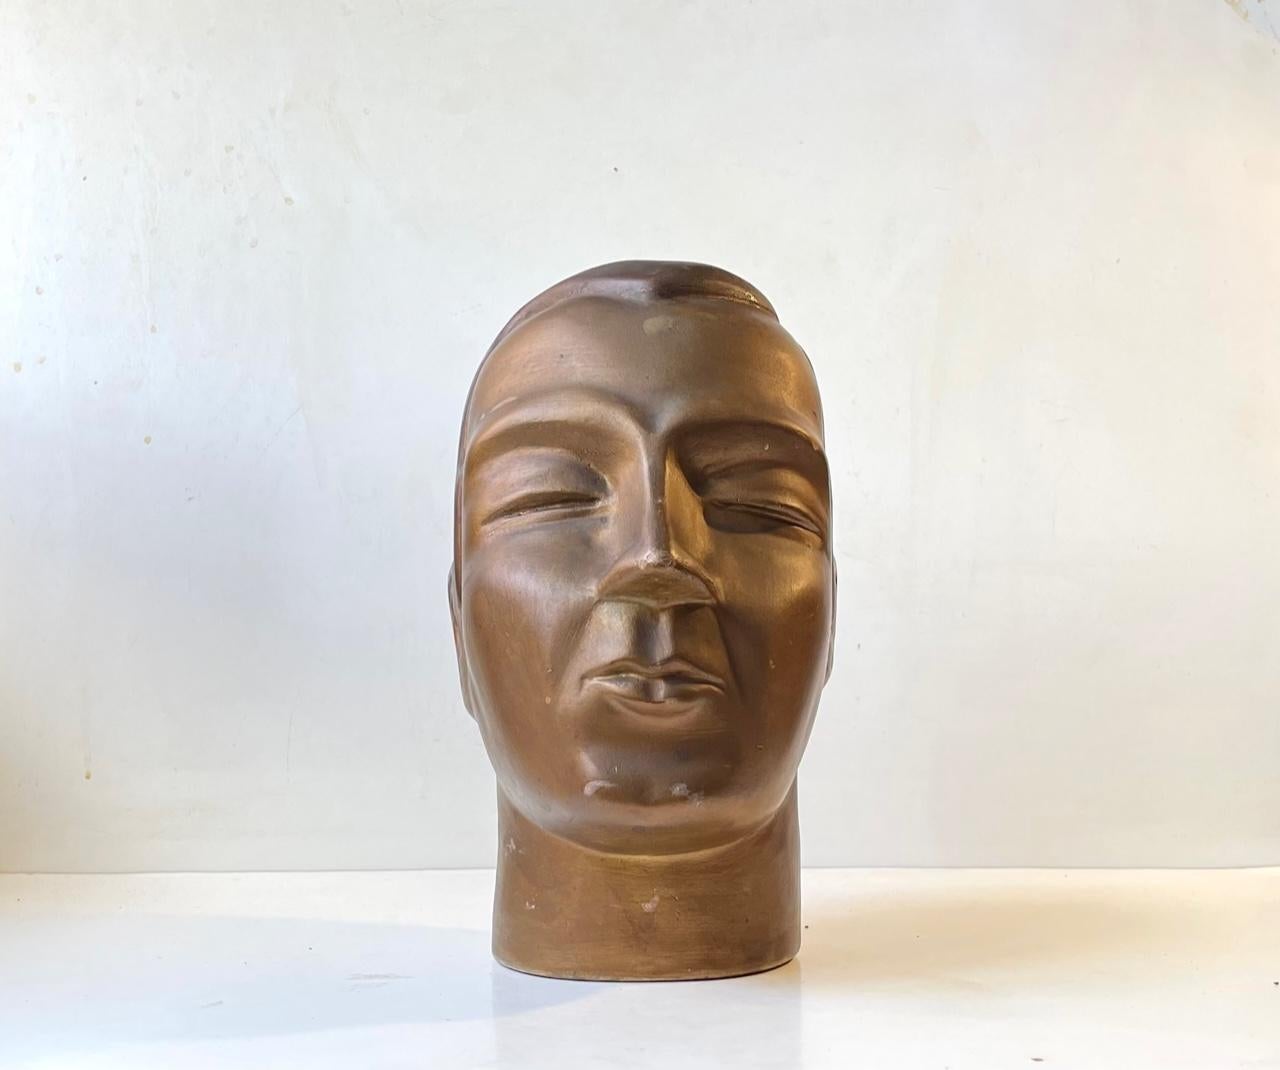 A natural or slightly oversized male mannequin head in painted pottery/plaster. Distinct Art Deco styling with exaggerated features. Made in France circa 1930. Perfect for displaying sunglasses, hats etc. Measurements: H: 30 cm, W: 15 cm, Dept: 20